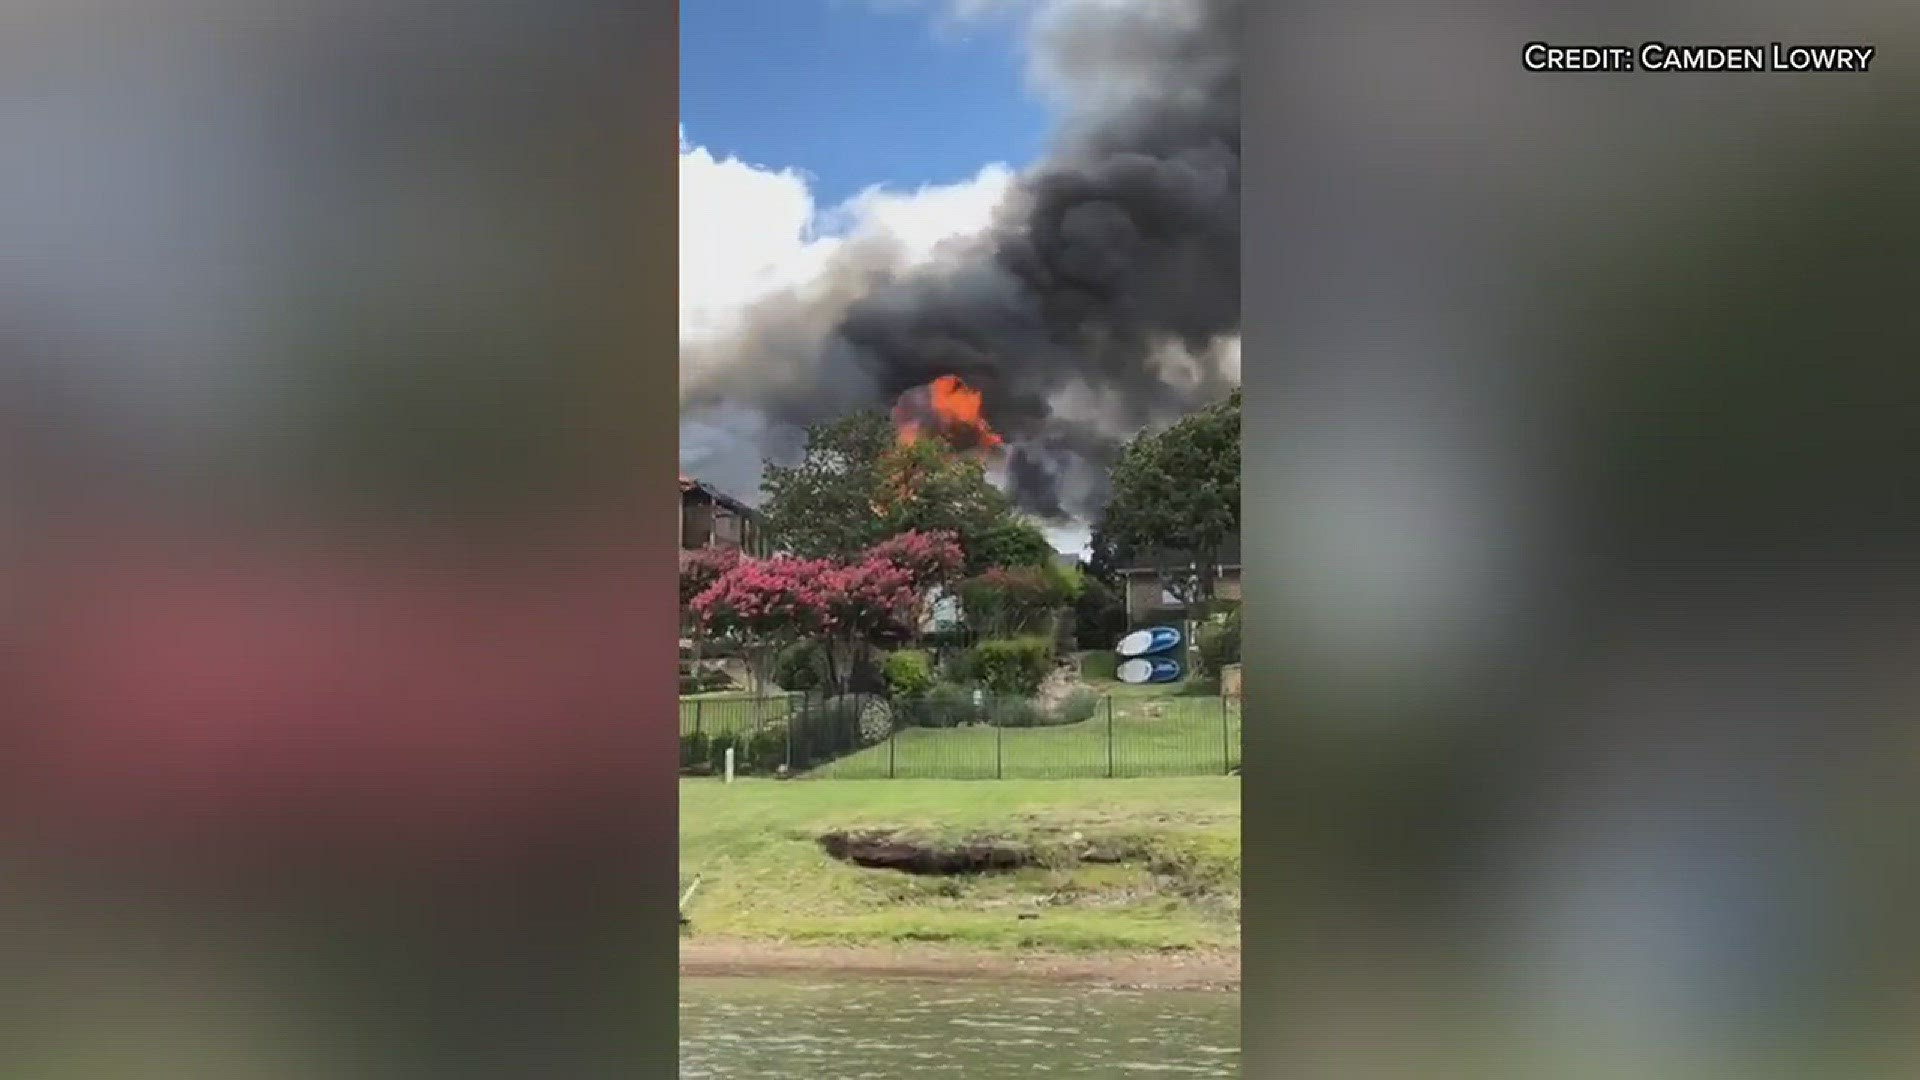 No one was home during the fire, which happened in Highland Village on Lake Lewisville. (Credit: Camden Lowry)